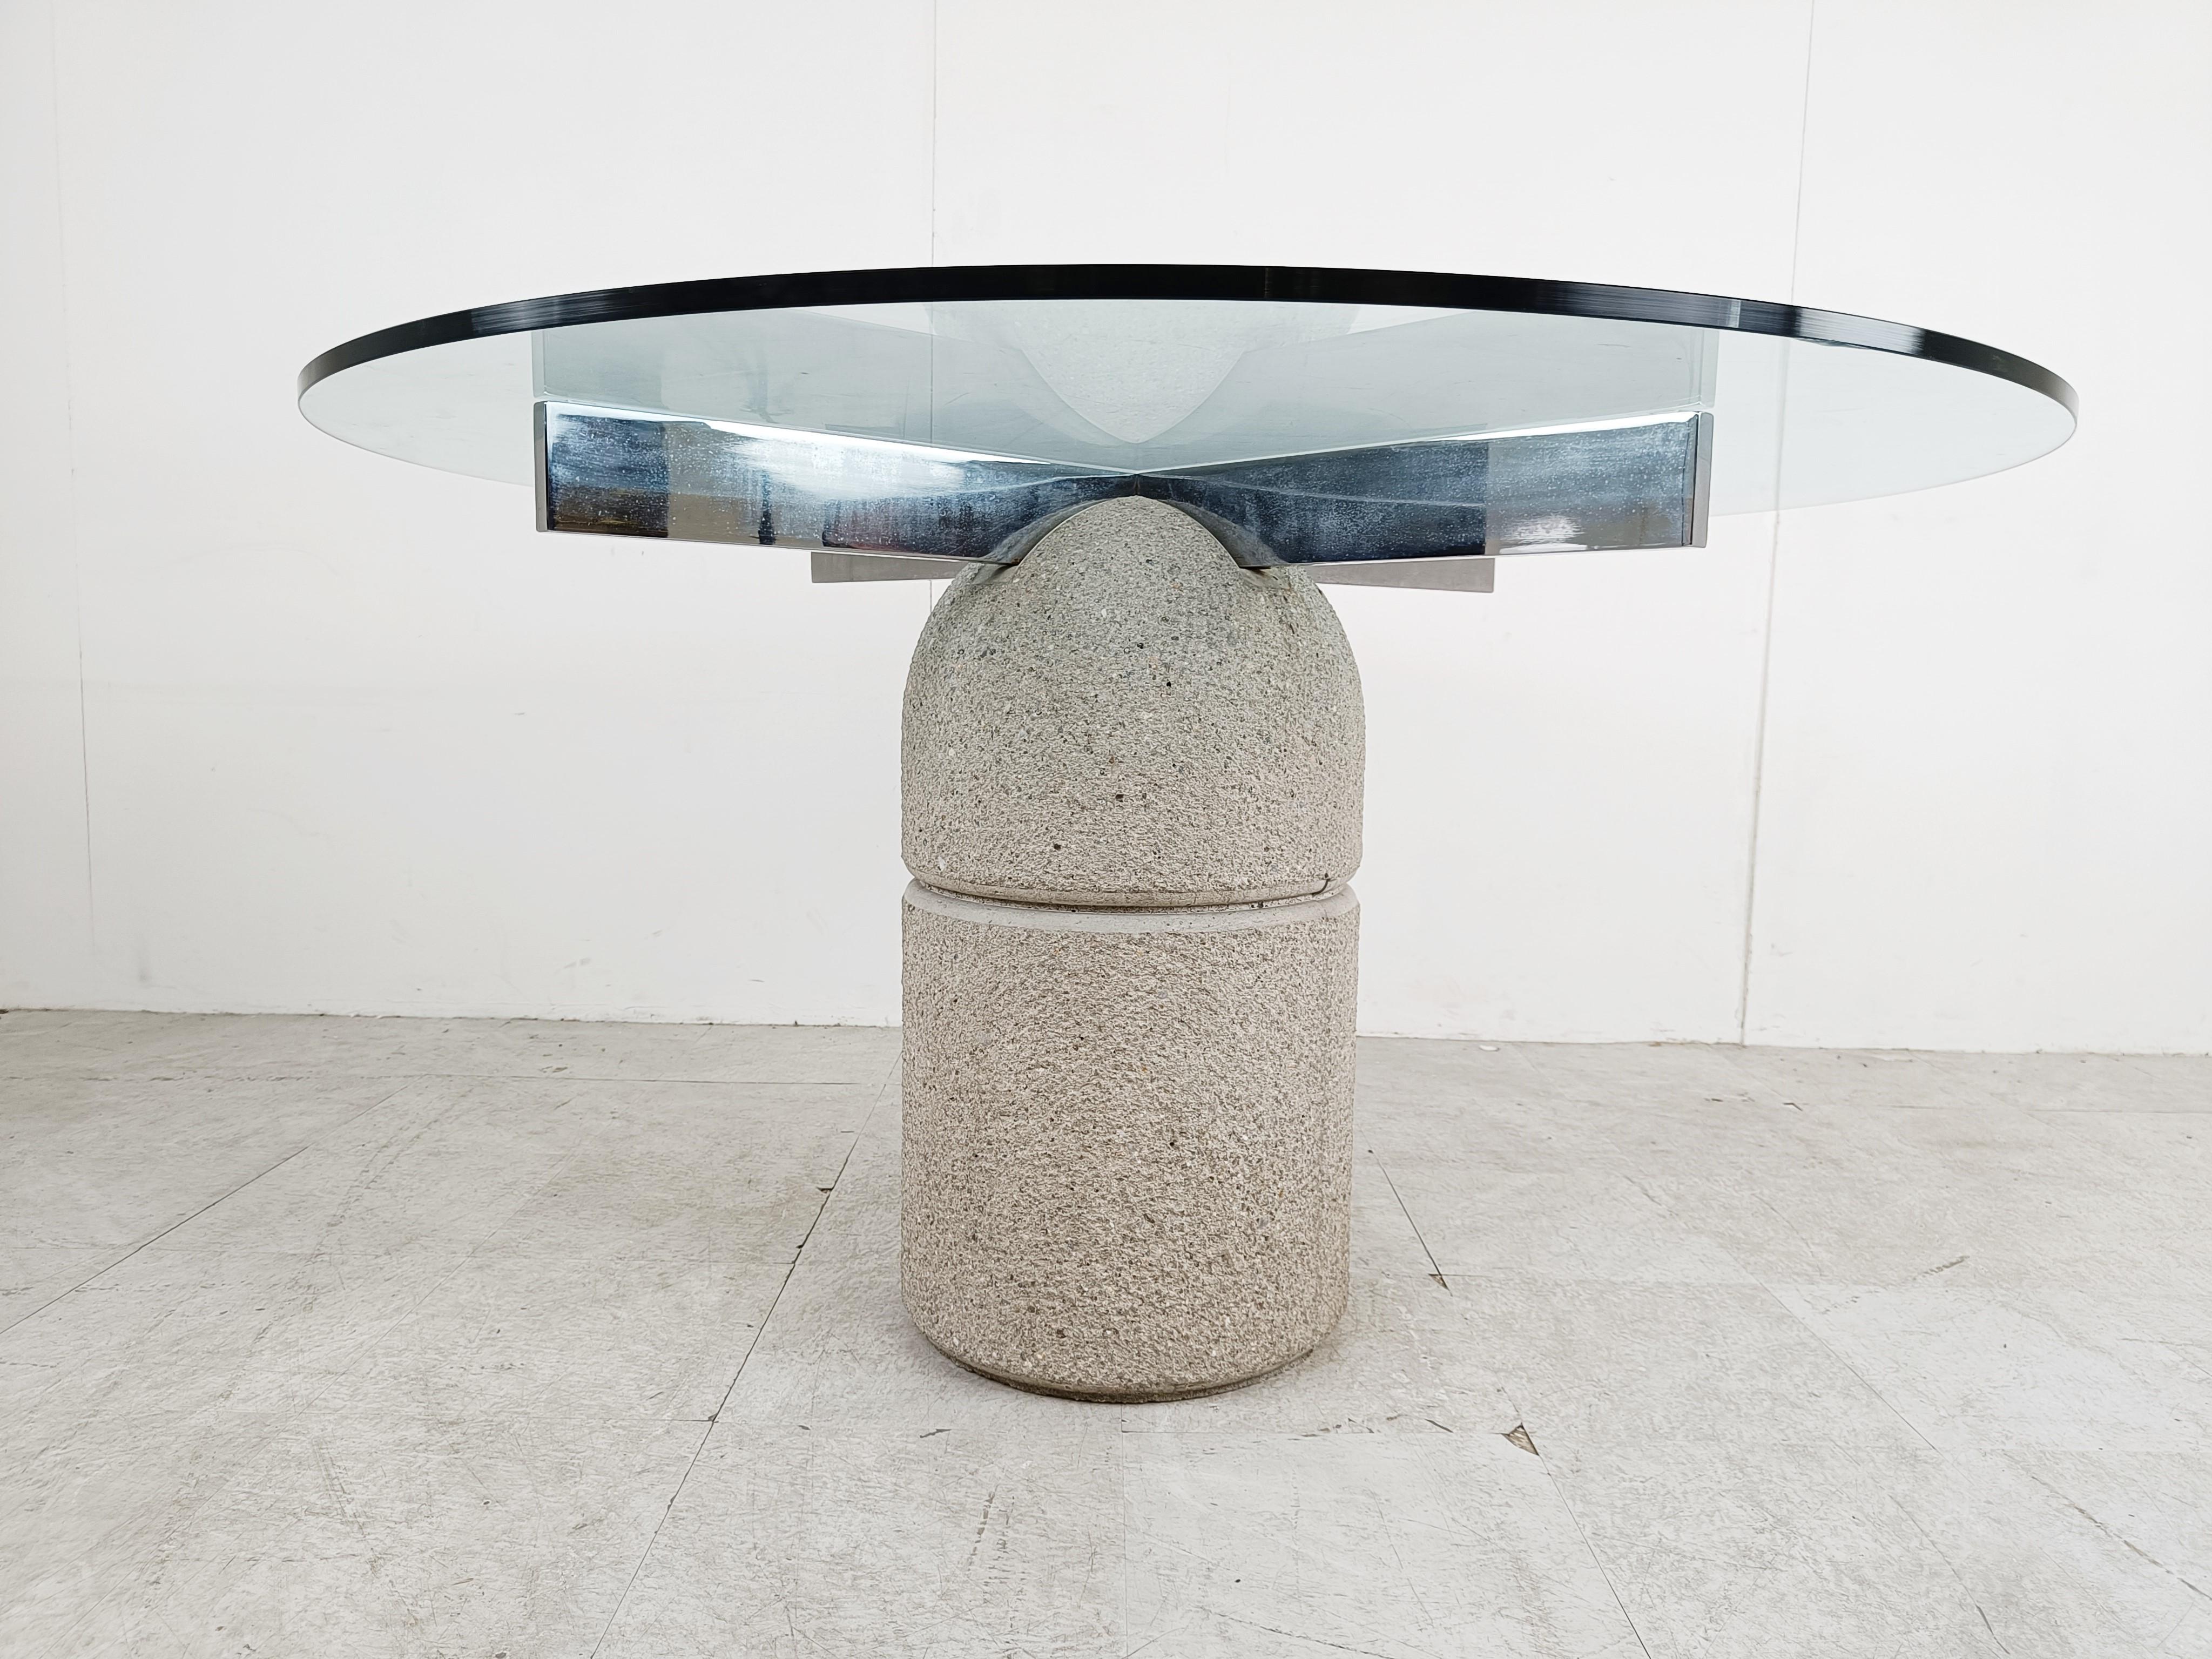 Concrete and chrome center or dining table designed by Giovanni Offredi for Saporiti Italy model 'Paracarro'.

The glass on the images is an example, we include a new glass as showed, but for custom glass sizes please contact us. 

The table base is